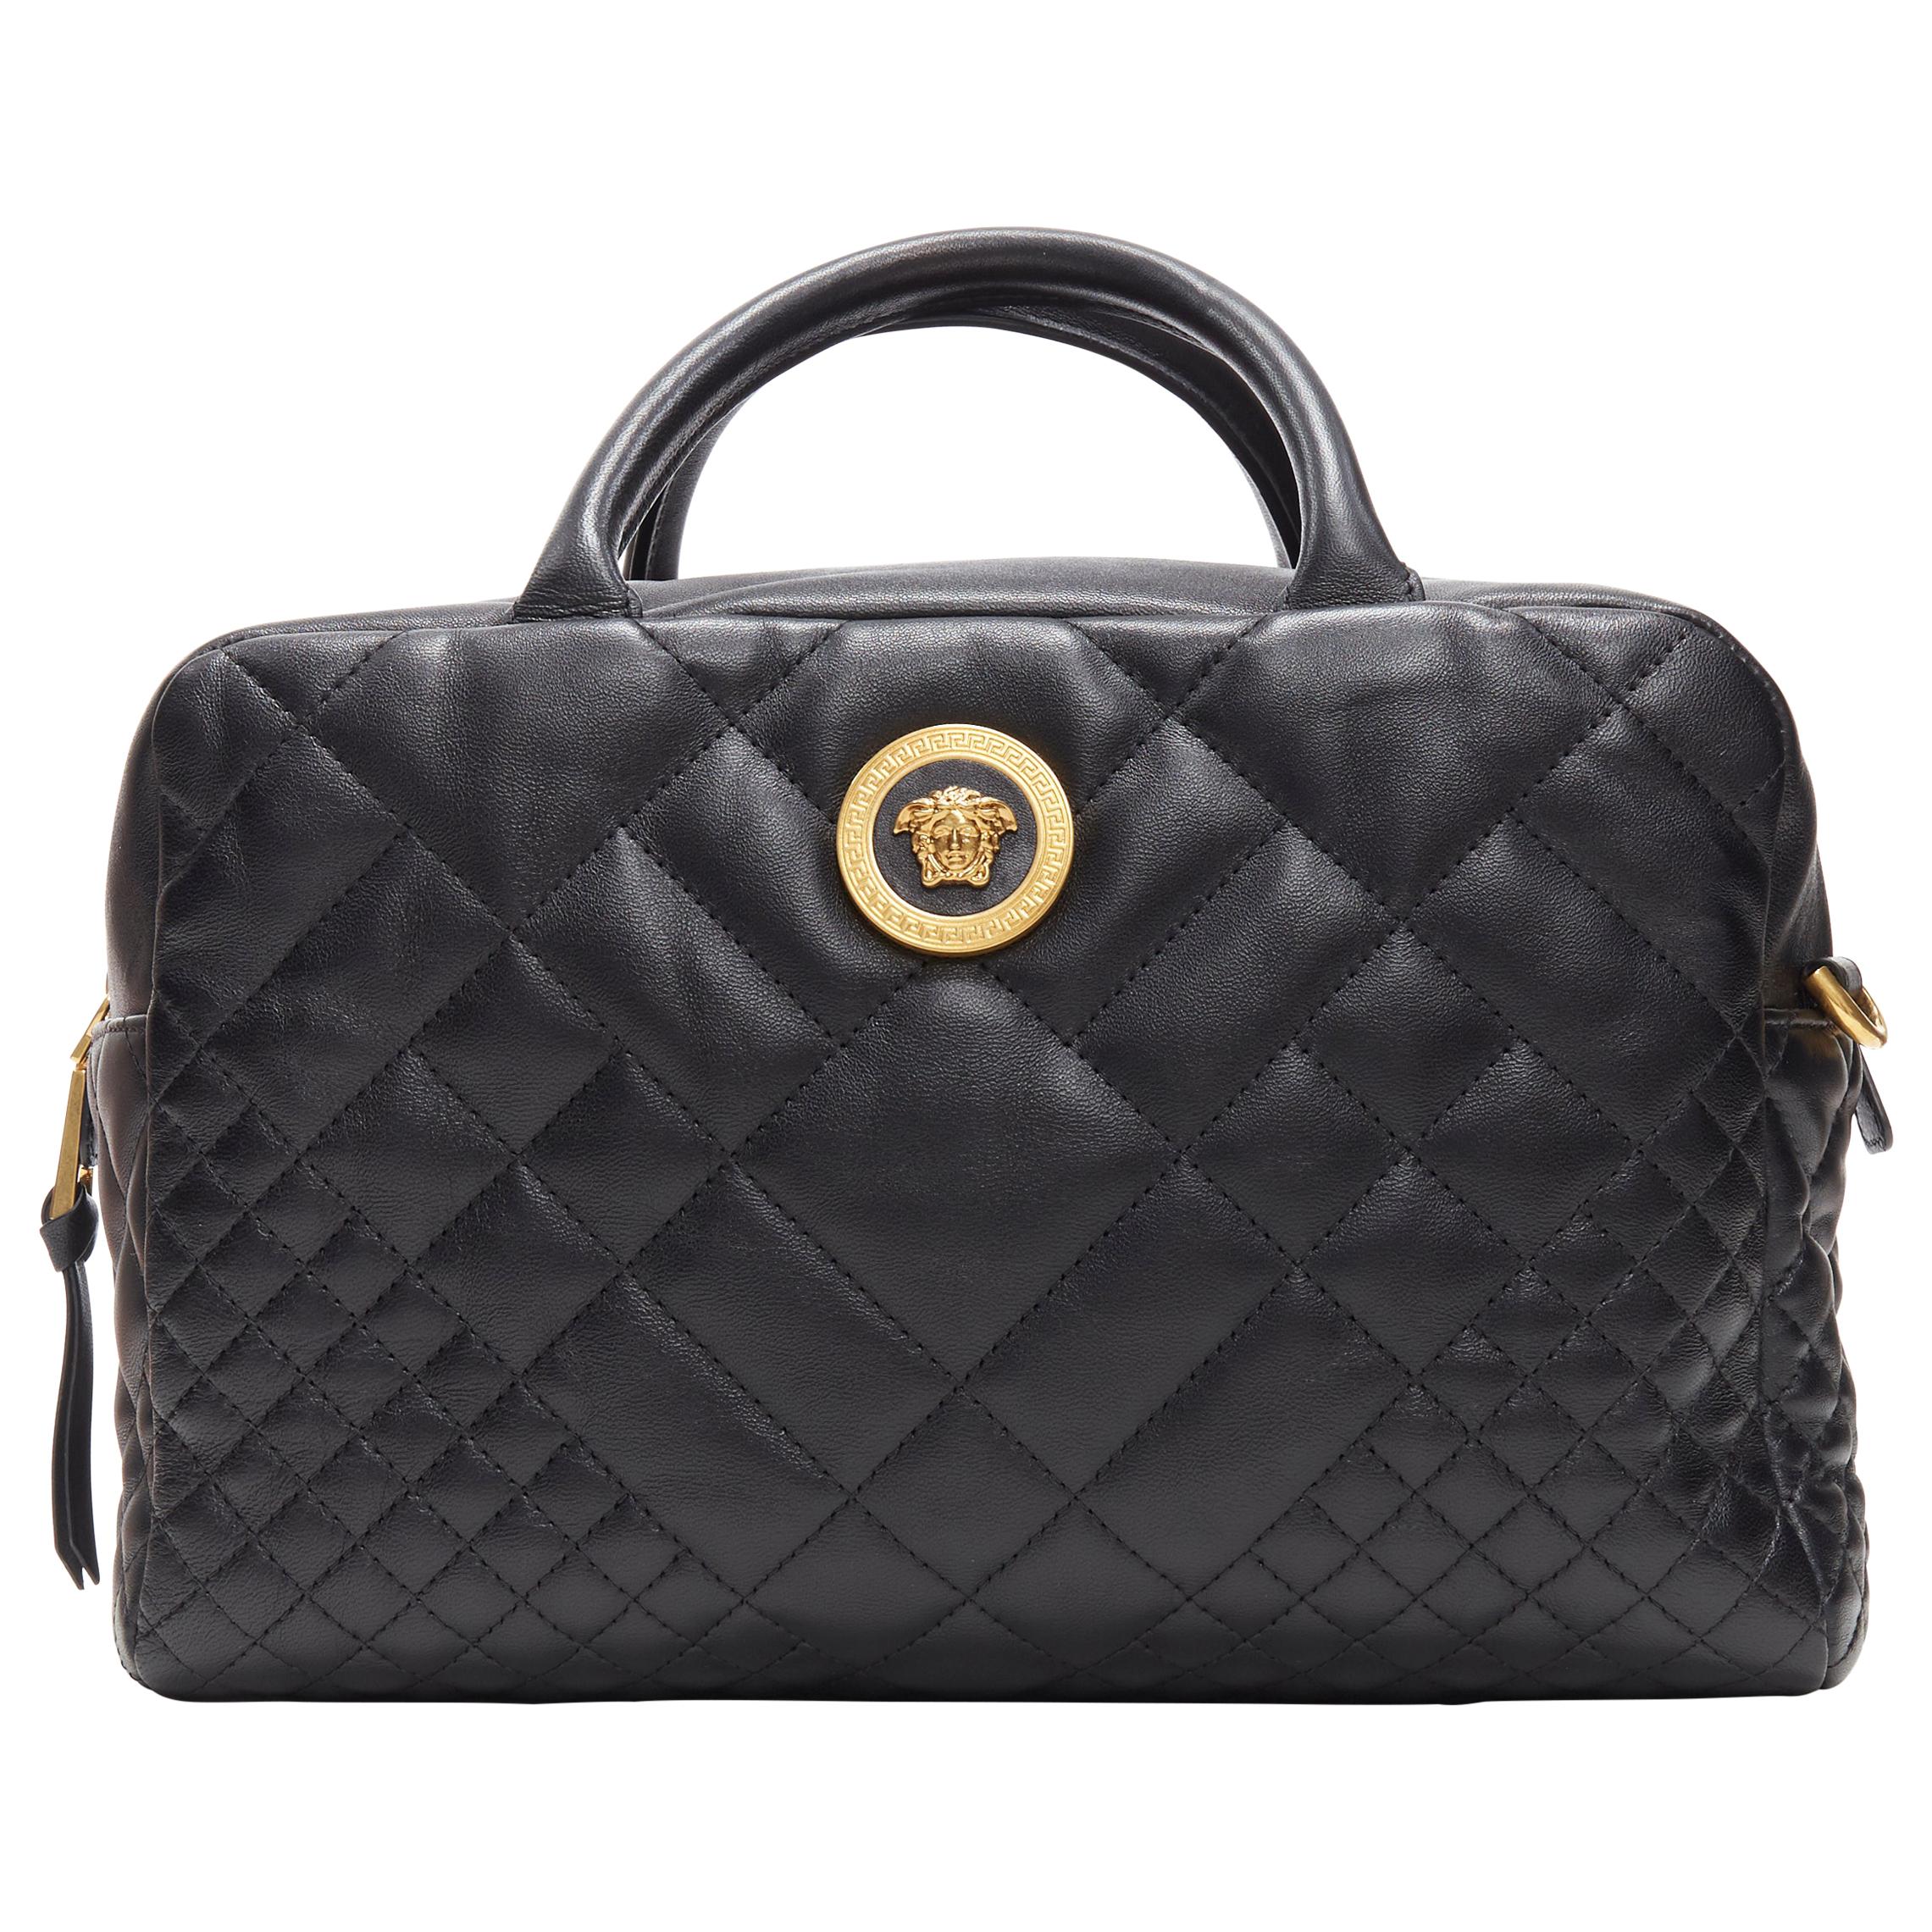 new VERSACE black diamond quilted lamb leather medusa large bowling bag satchel